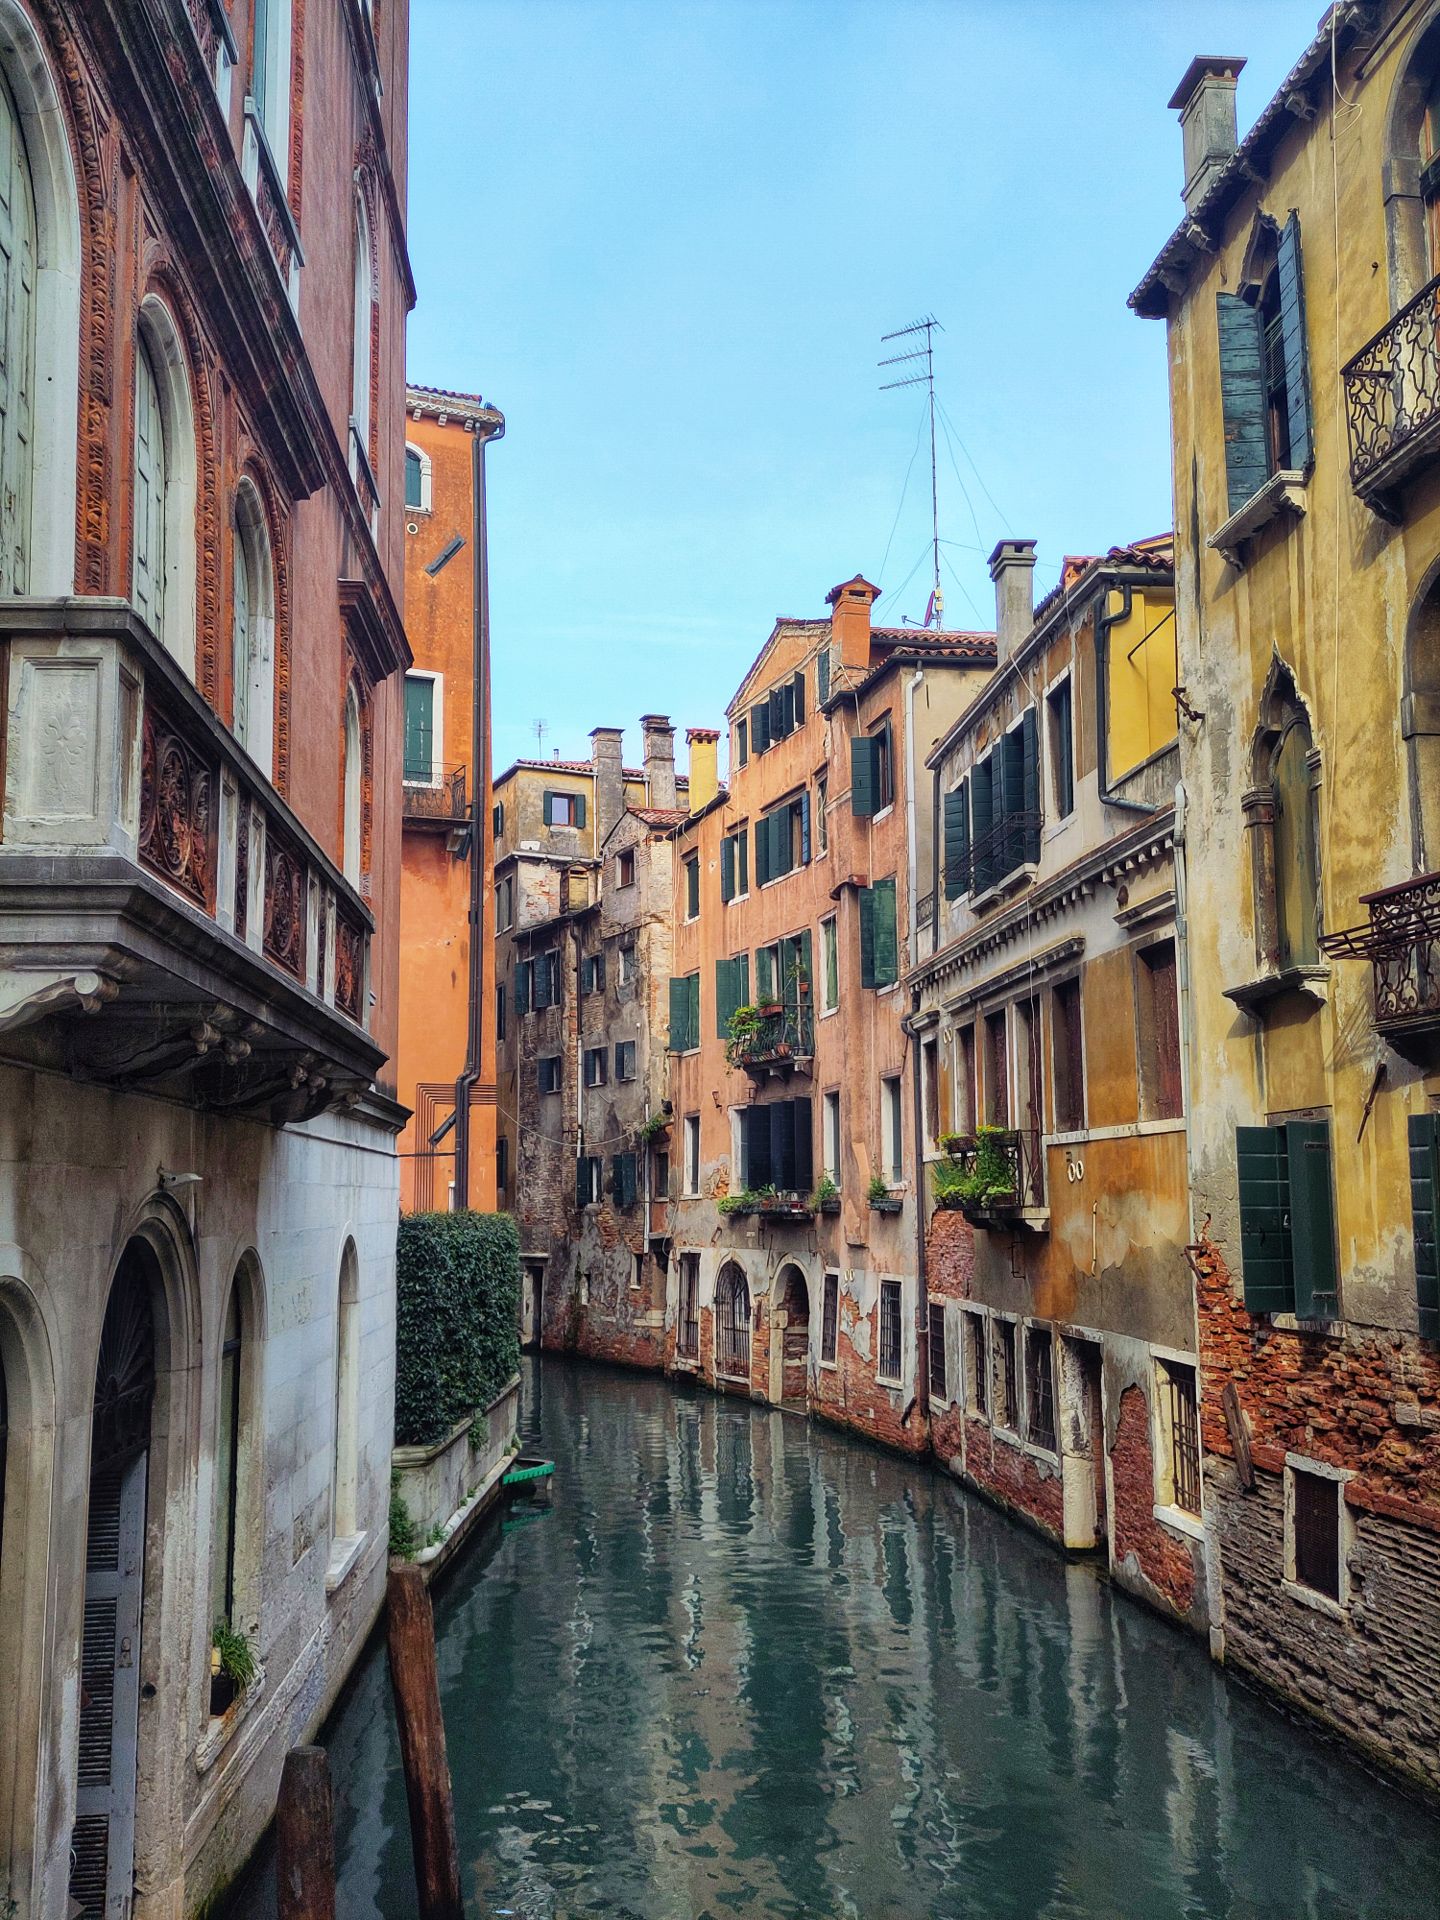 On a sunny day, green-ish water in the canals of Venice, bordered with yellow and orange tinted buildings.